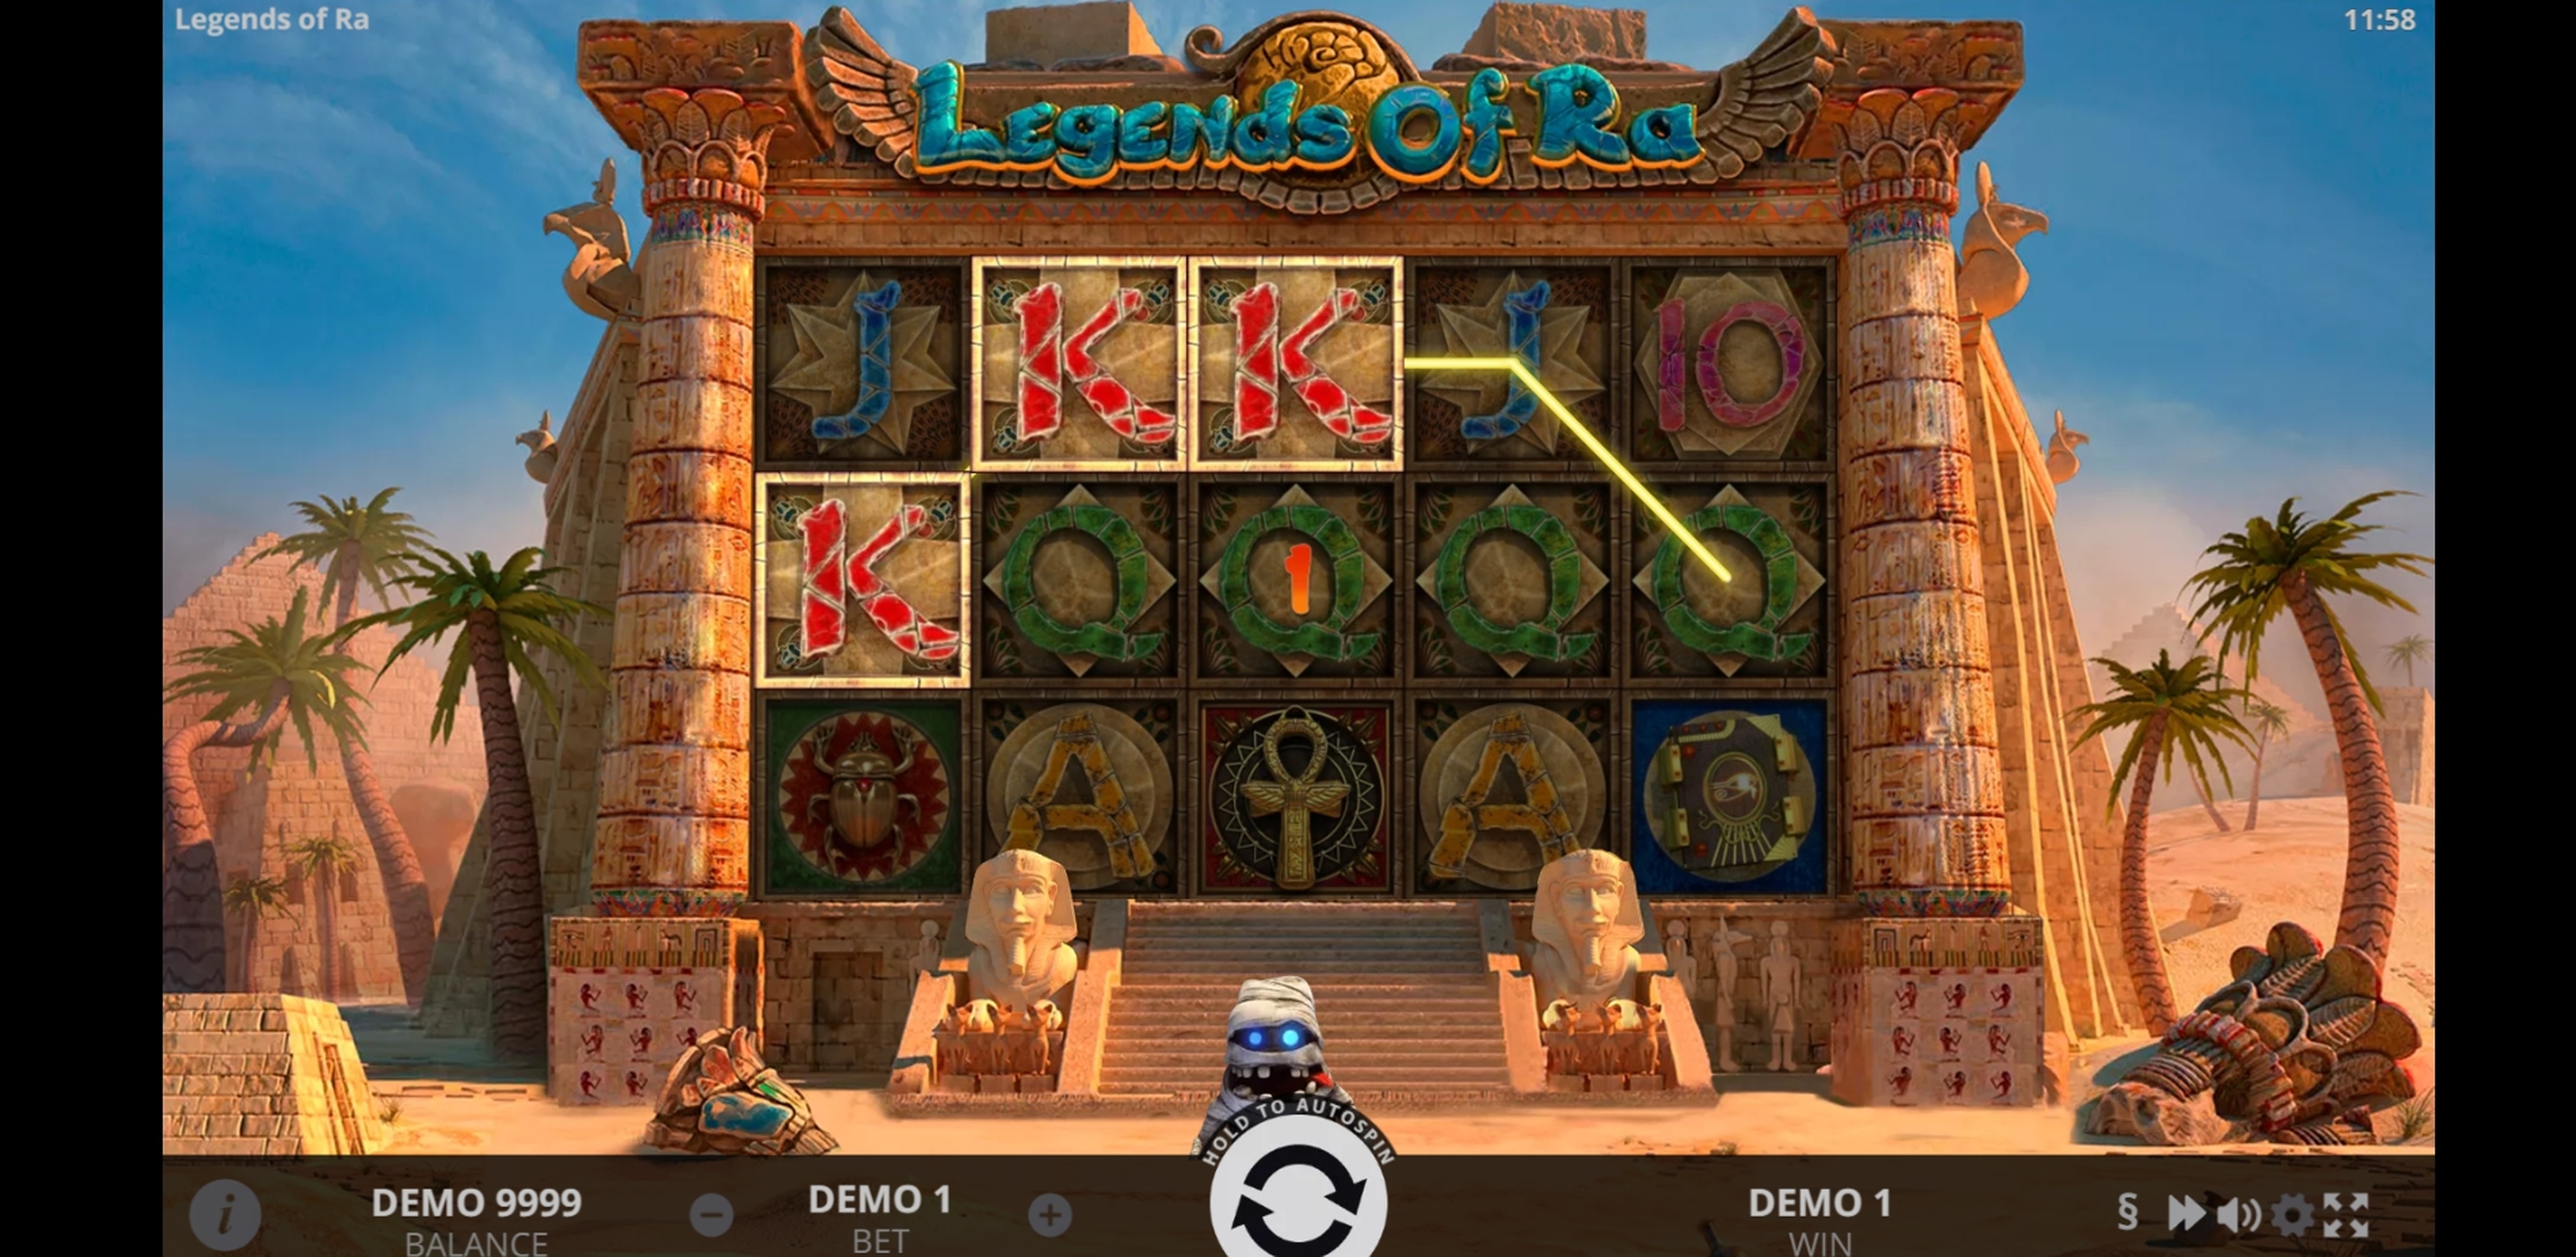 Win Money in Legends of Ra Free Slot Game by Evoplay Entertainment